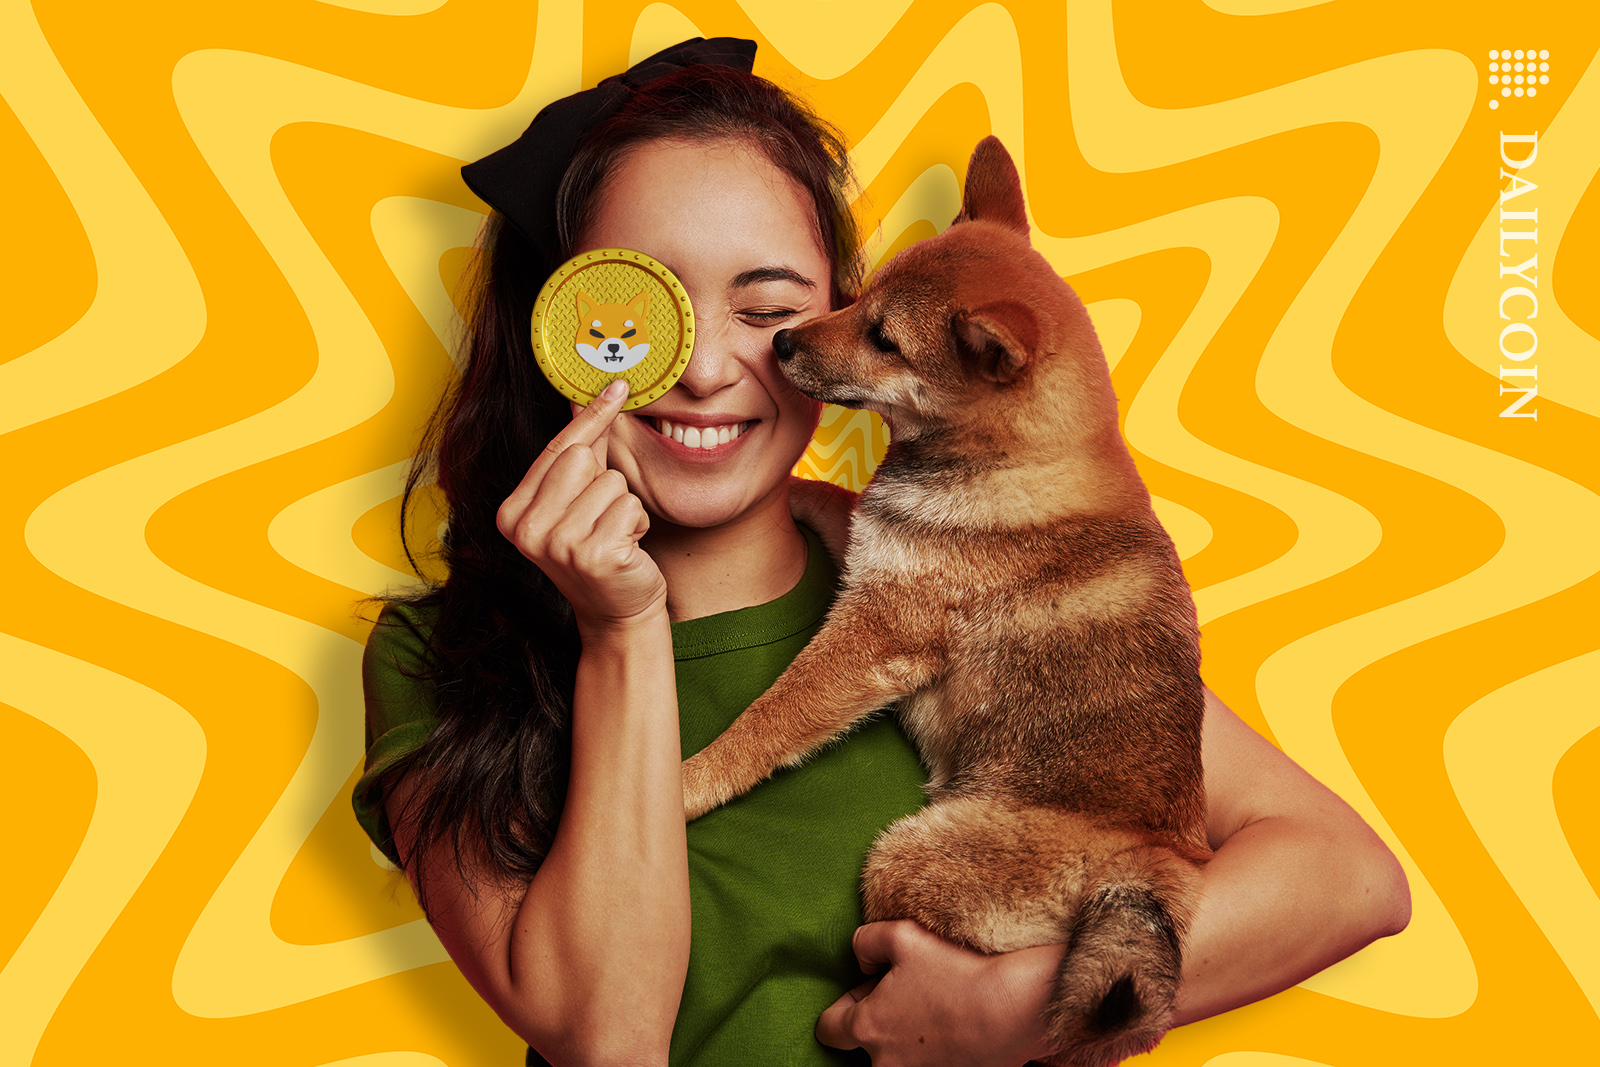 Girl holding a shiba inu puppy and a shib token by her eye smilling.